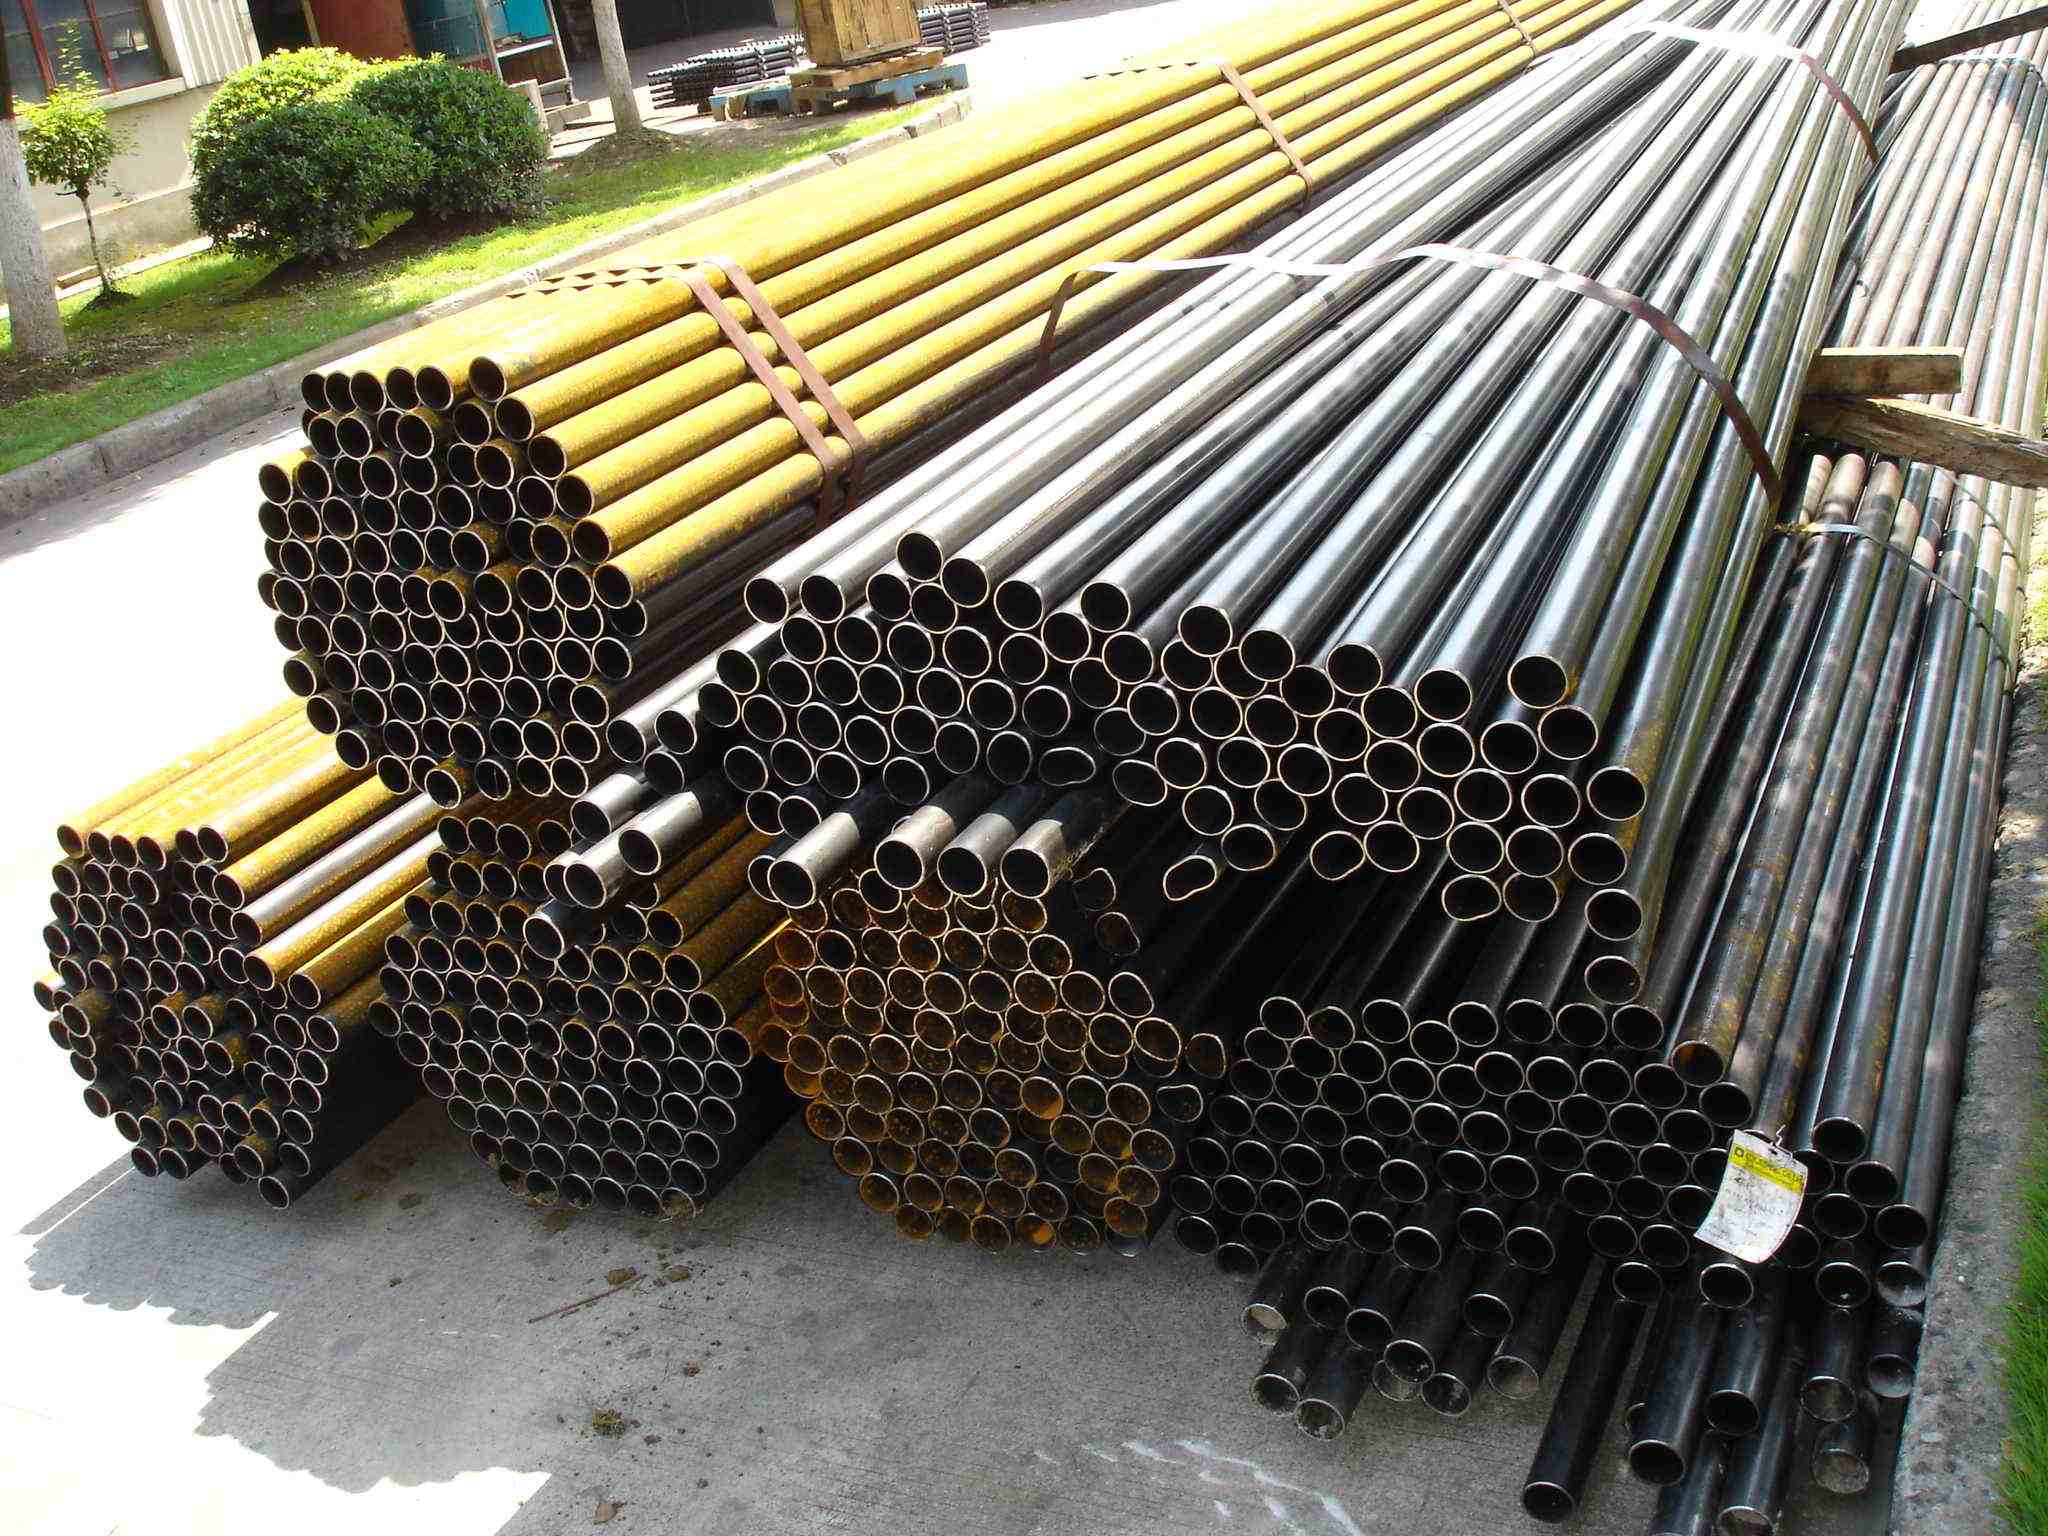 Low carbon steel tubing with seamless